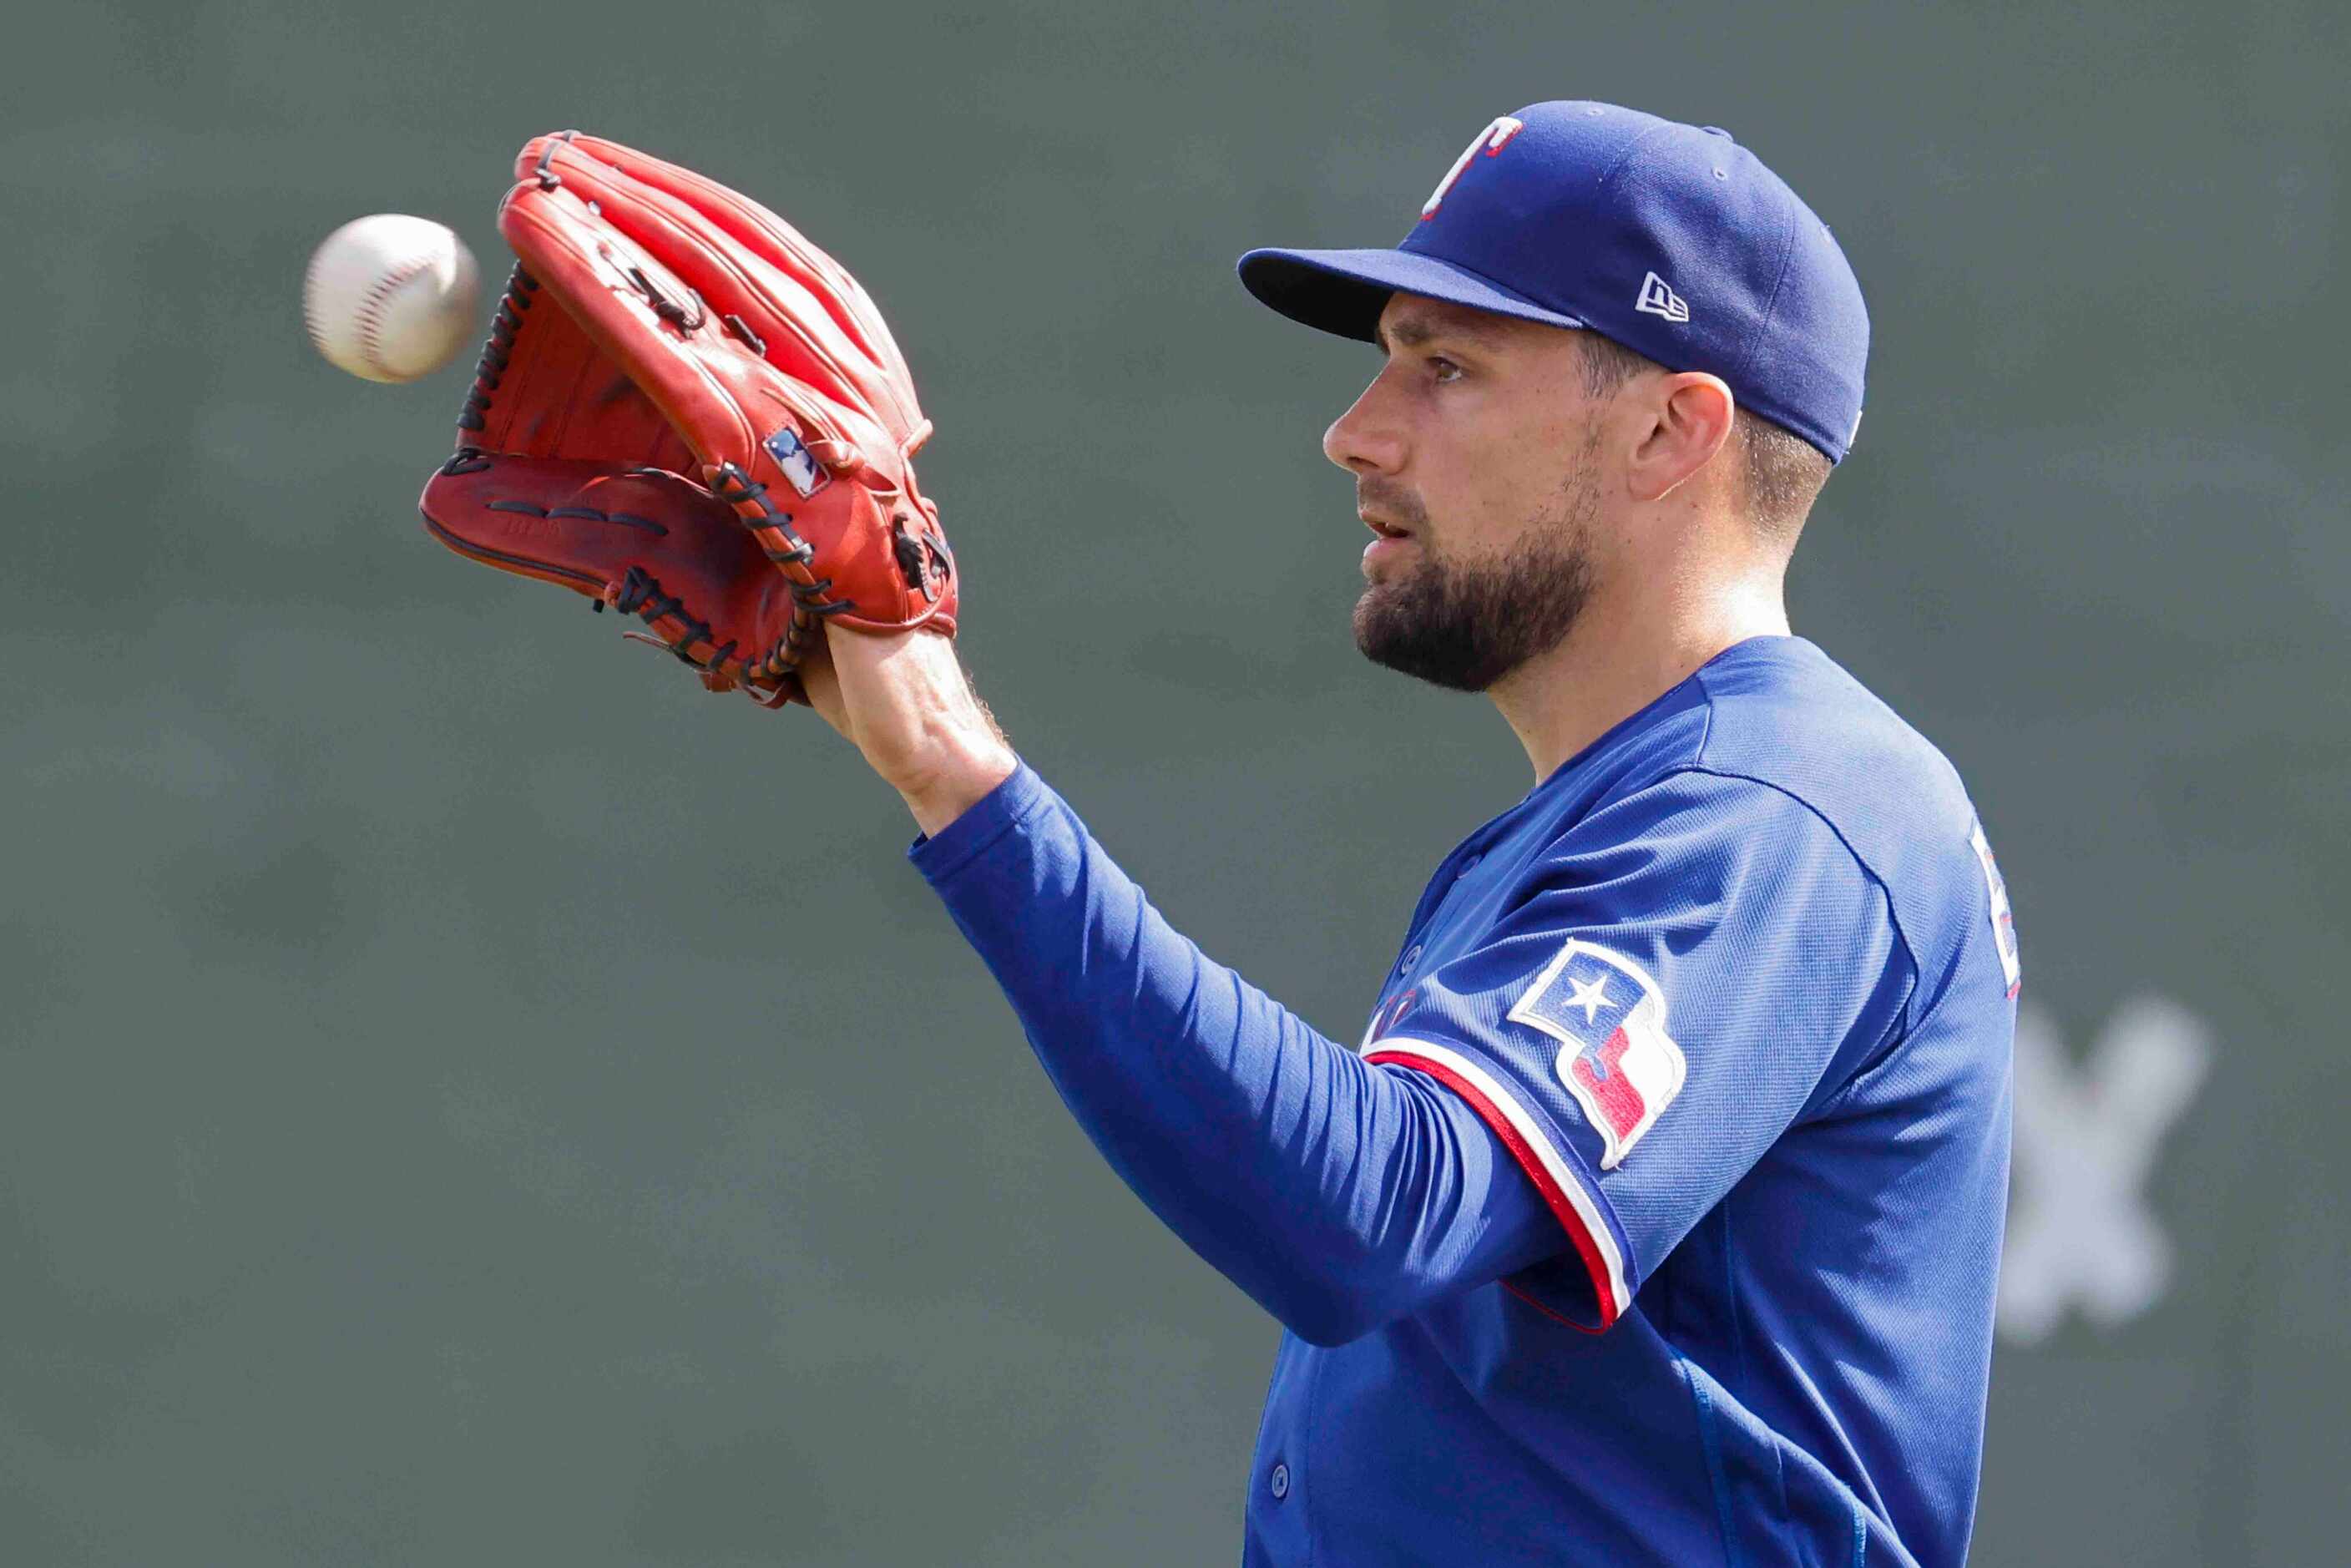 Texas Rangers pitcher Nathan Eovaldi catches a ball from a catcher during a spring training...